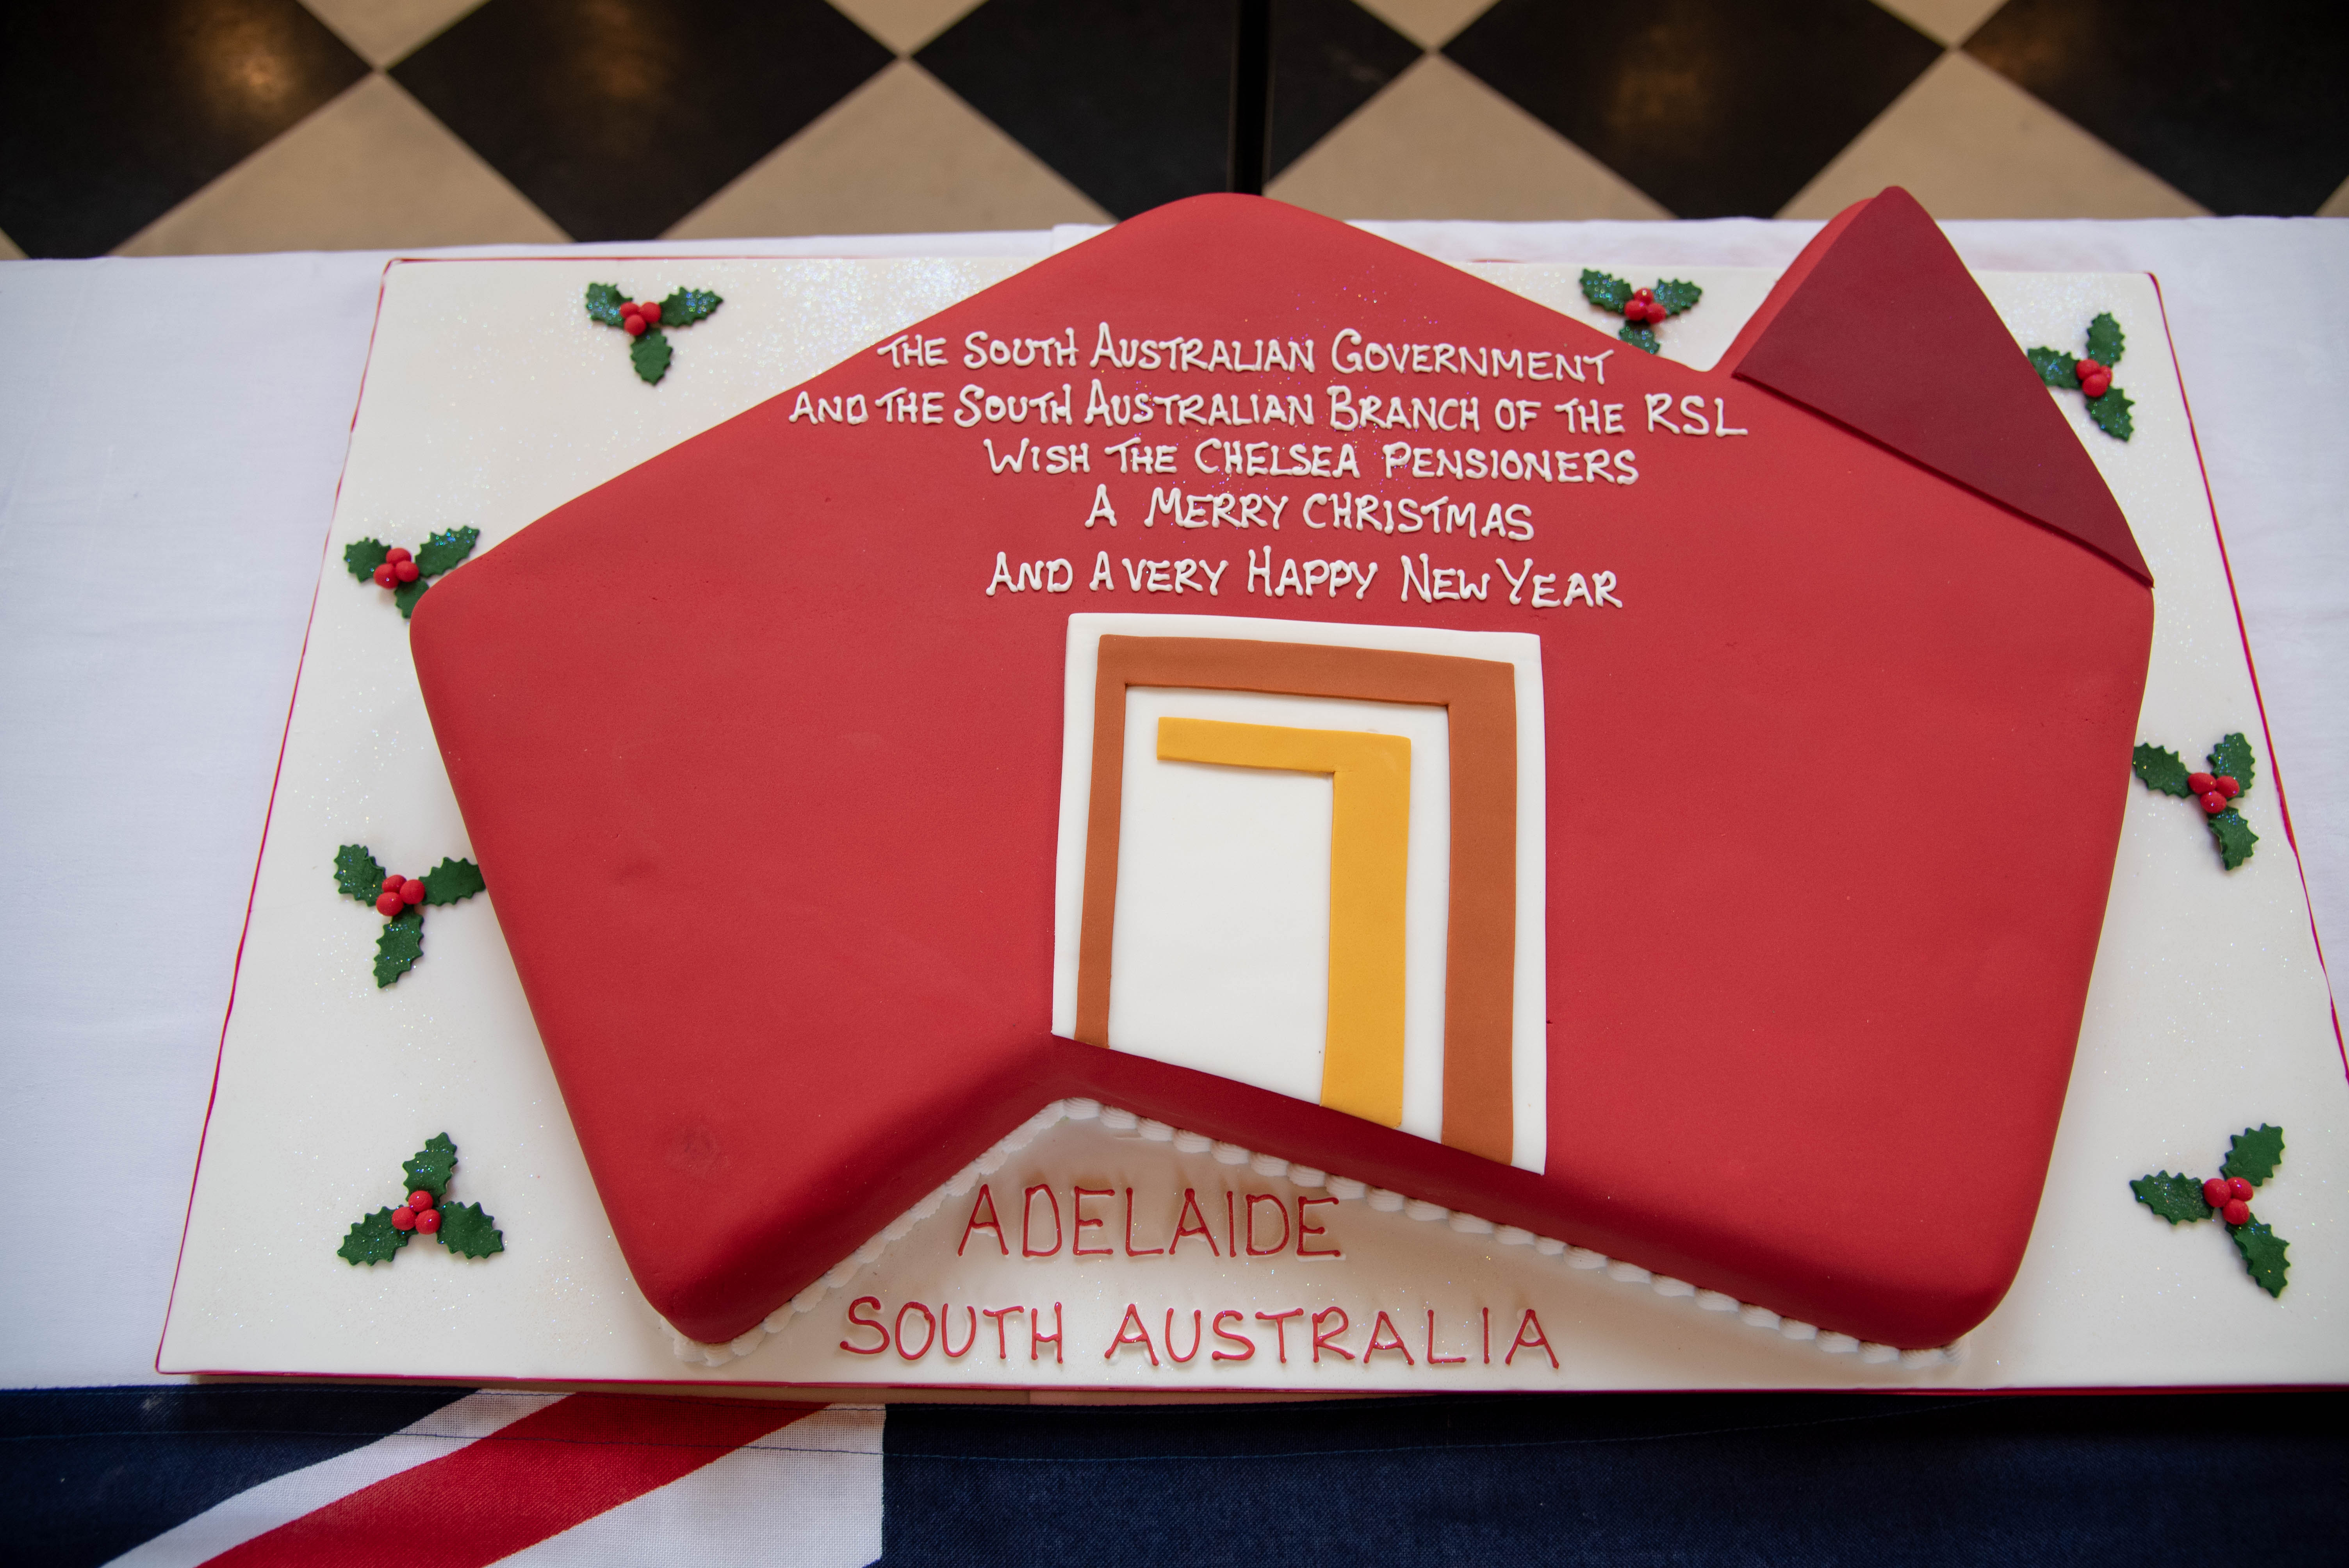 This year's cake shaped in the Adelaide logo